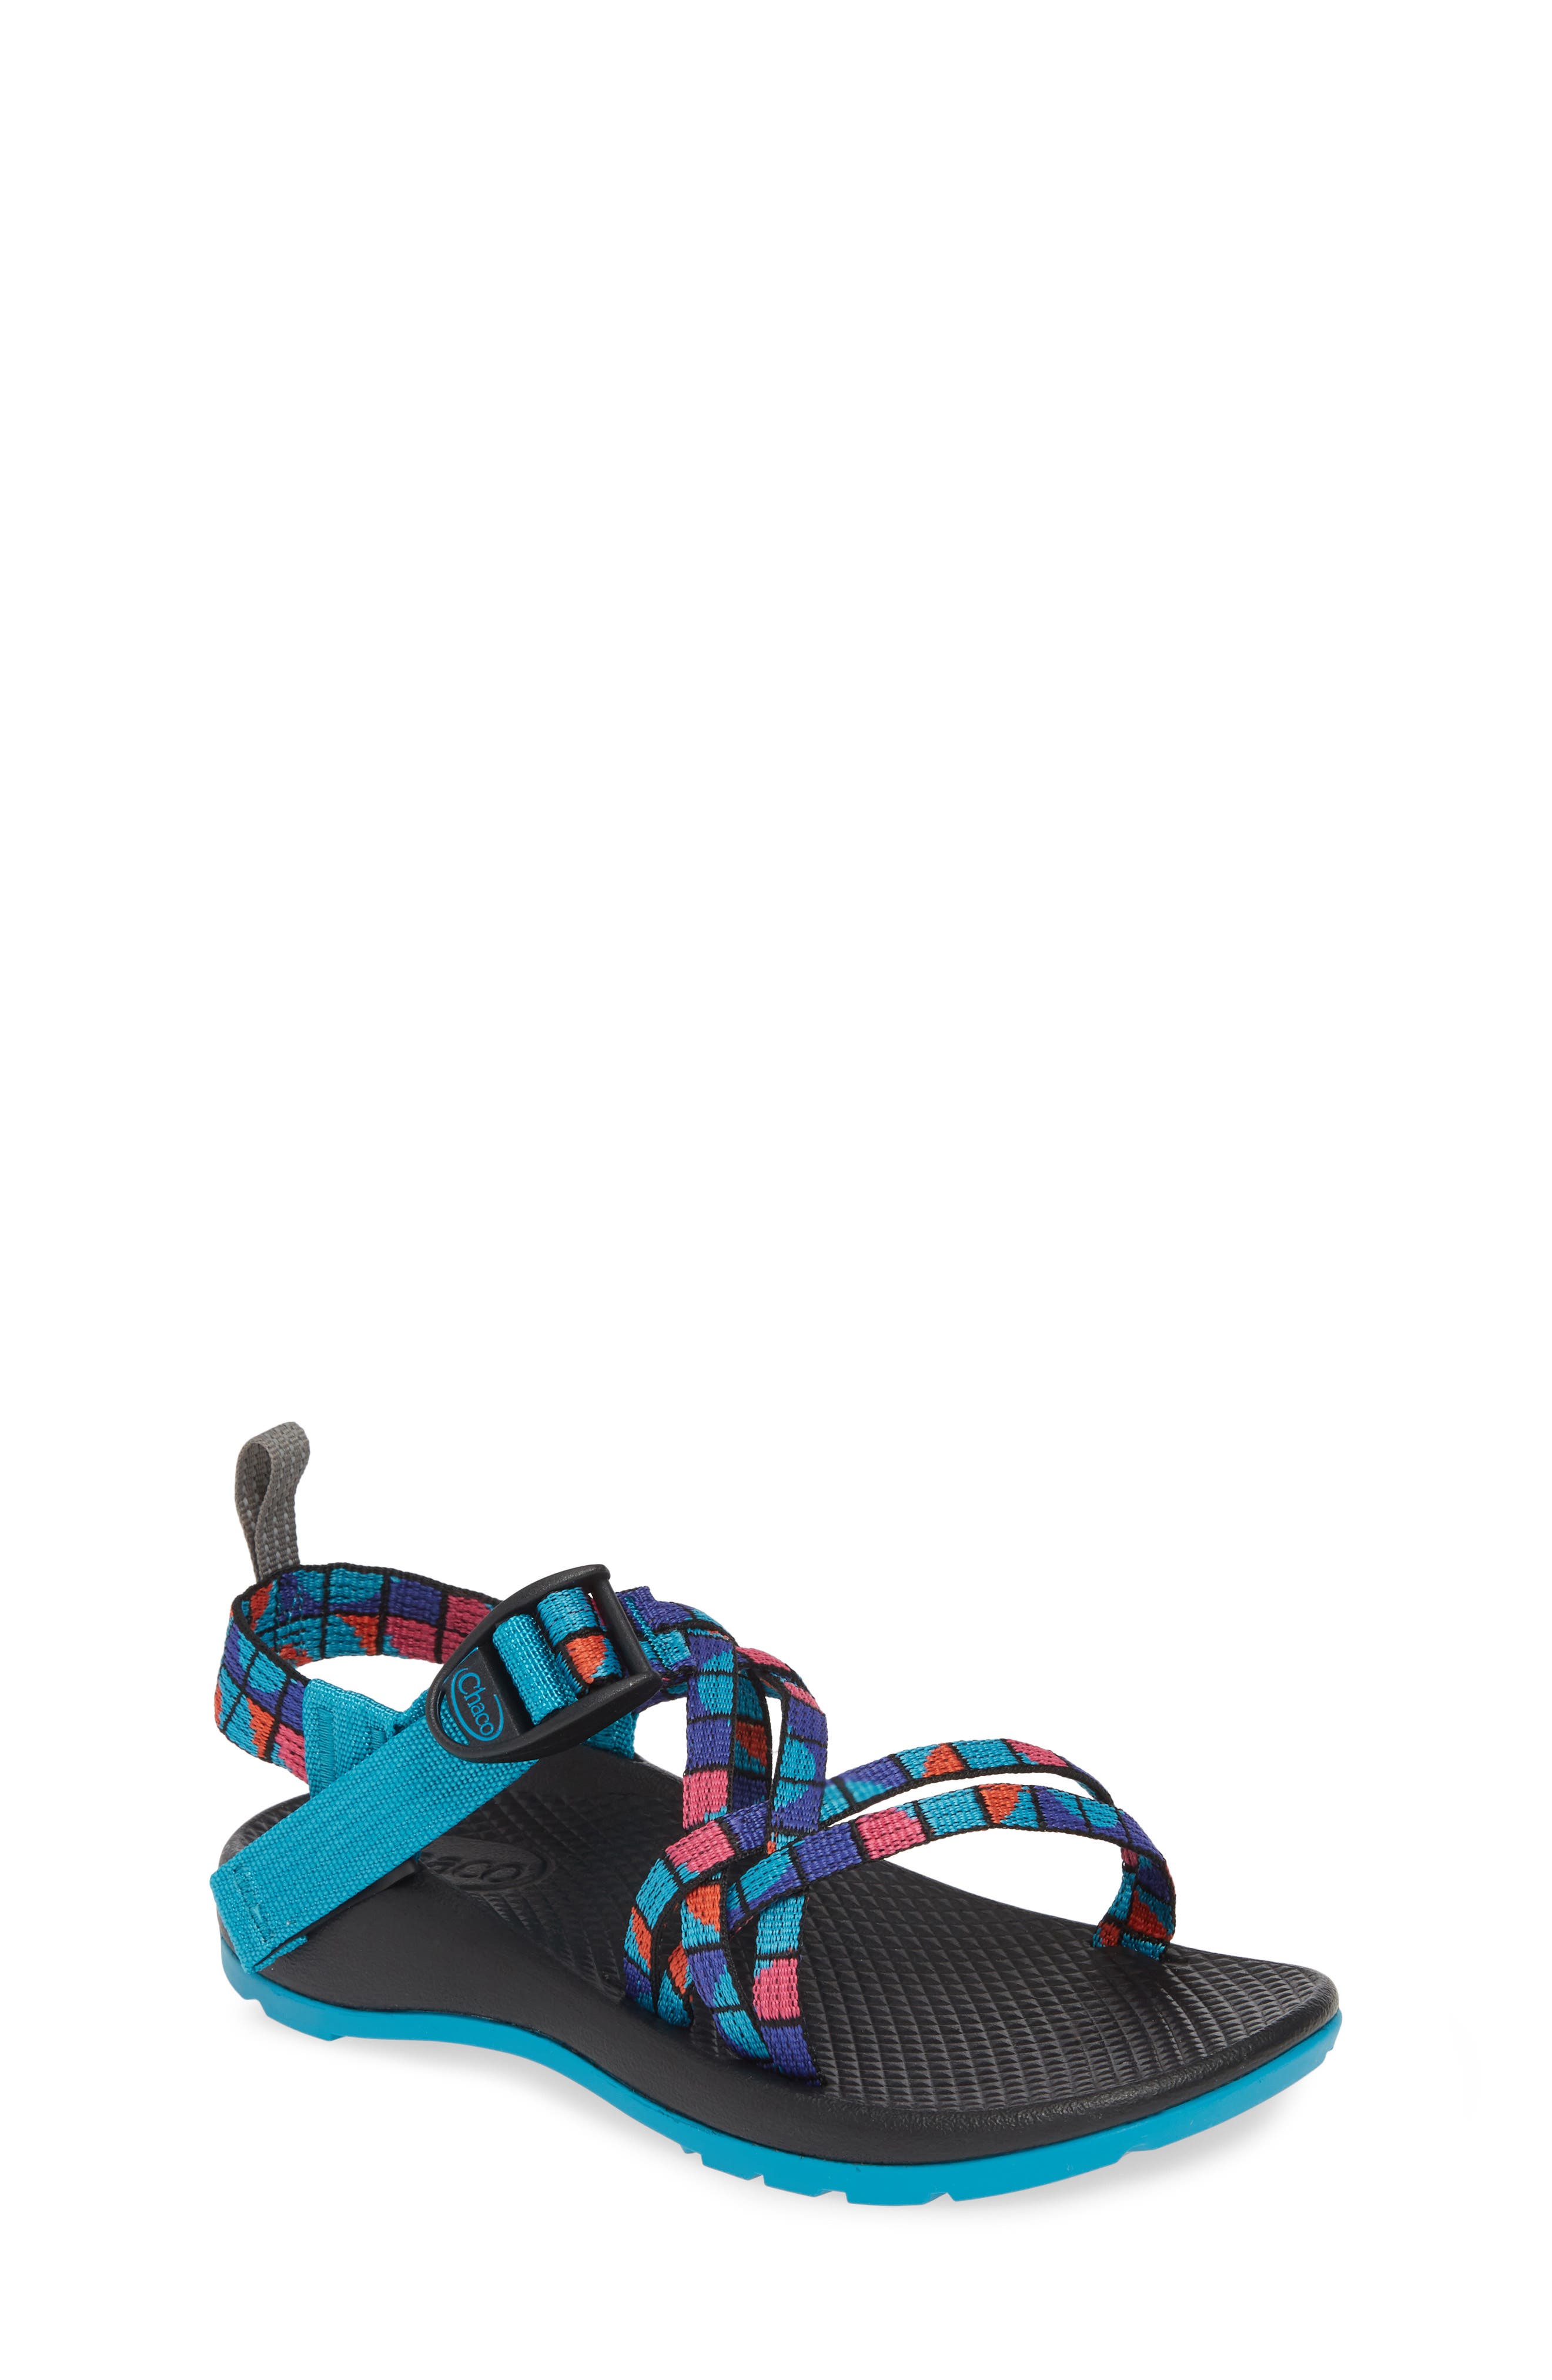 Kids' Chaco Shoes | Nordstrom